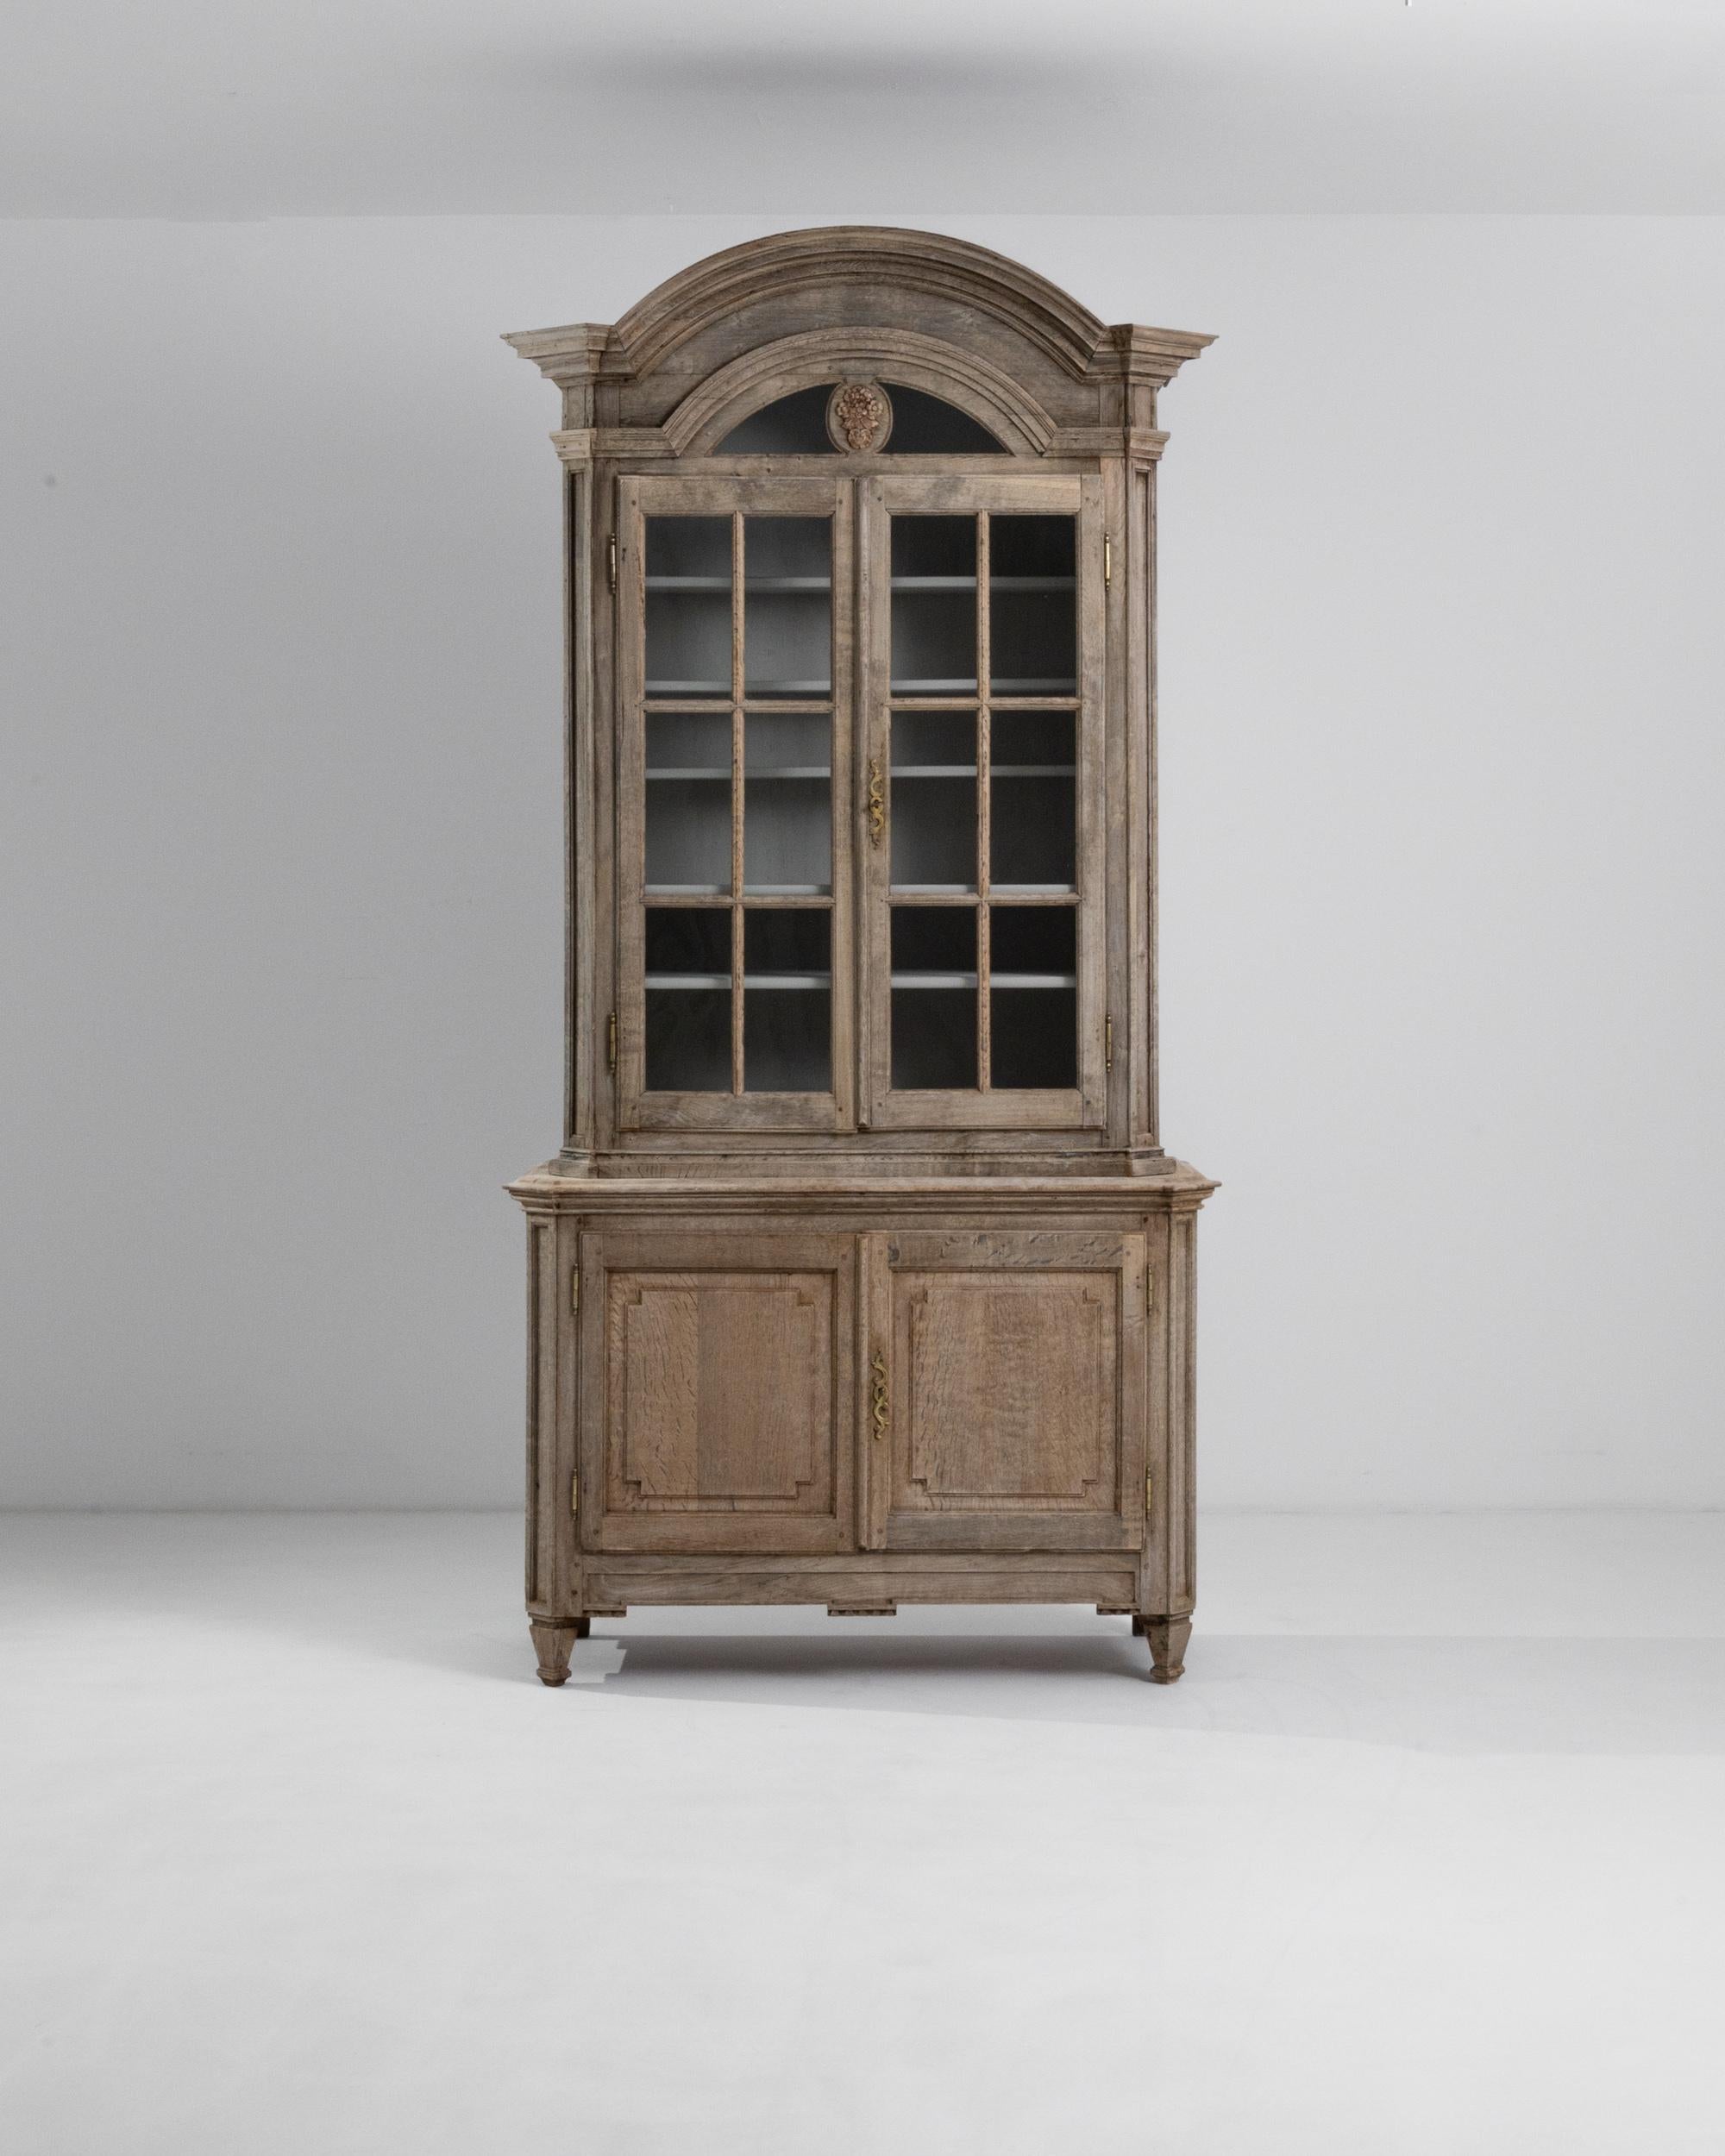 Neoclassical grandeur meets provincial charm in this antique oak vitrine. Made in France, circa 1800, the grand moldings of the arched cornice evoke the victorious architecture of the Napoleonic era —while mullioned windows below recall the houses